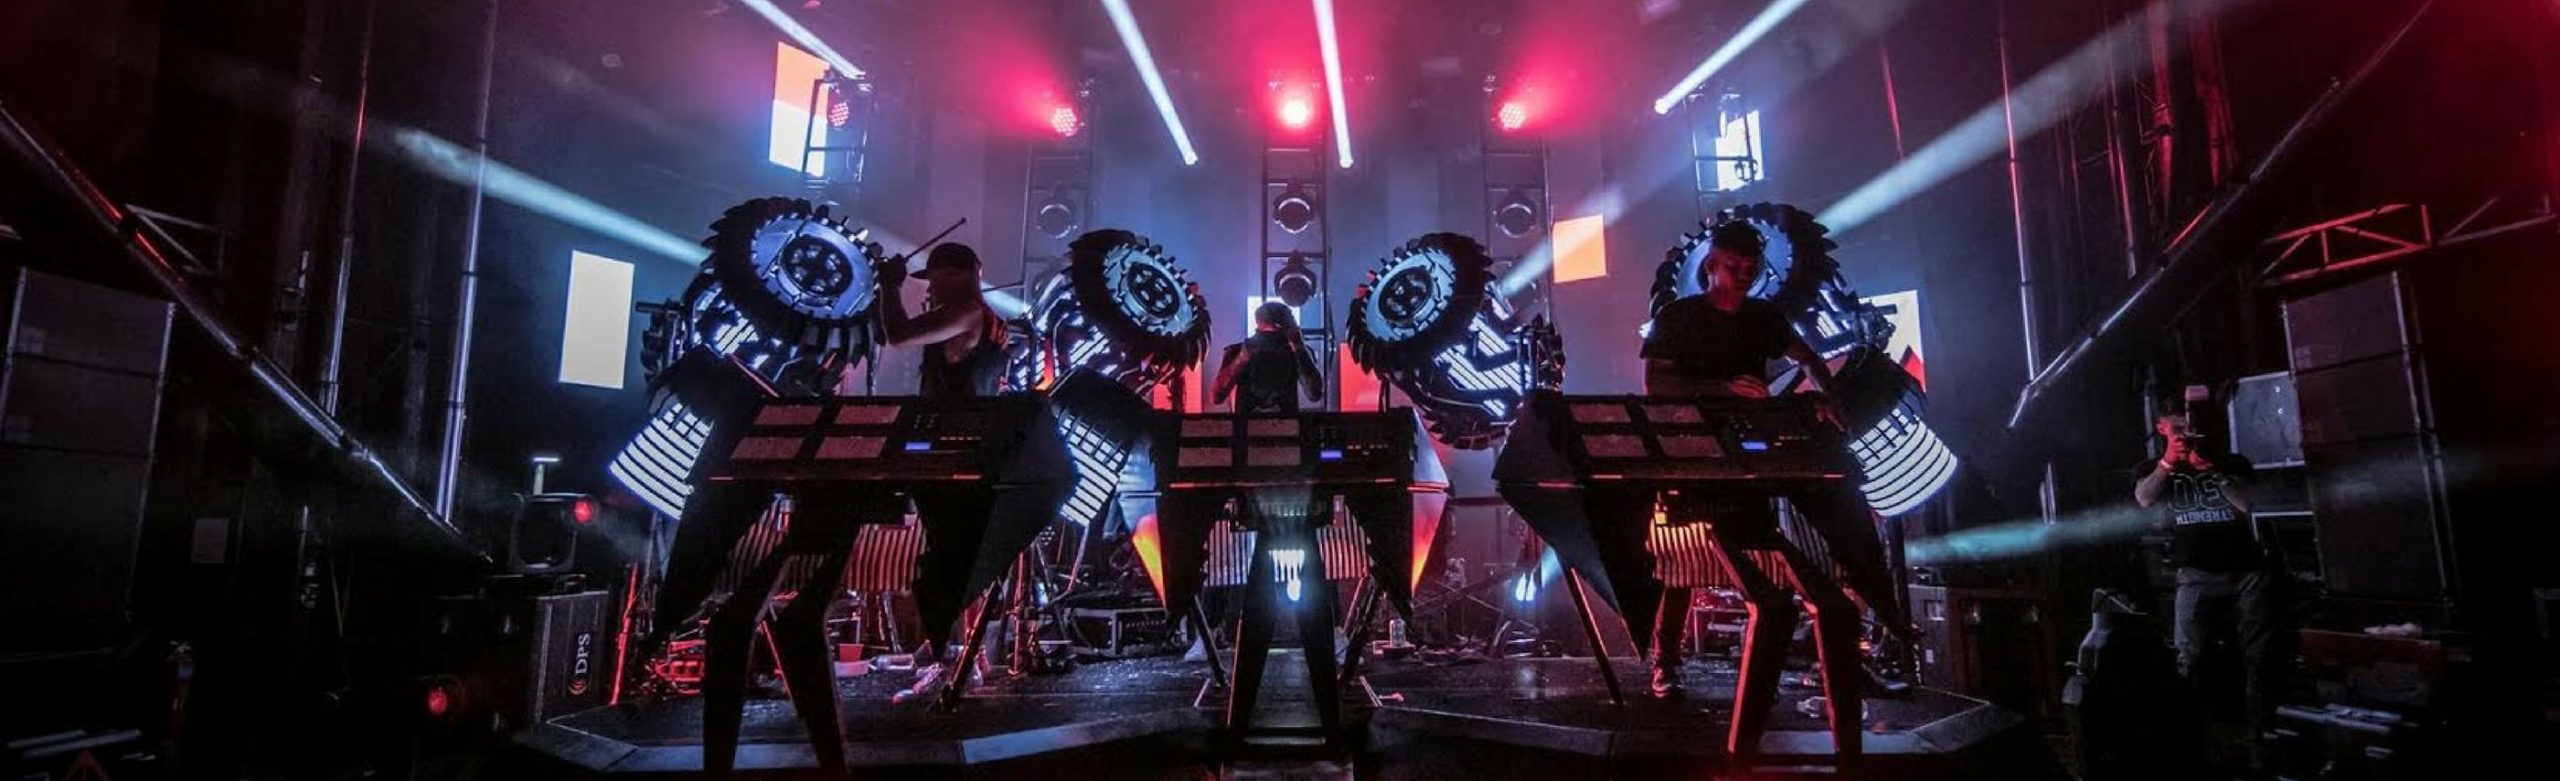 A Logjam Conversation With The Glitch Mob (Interview) Image